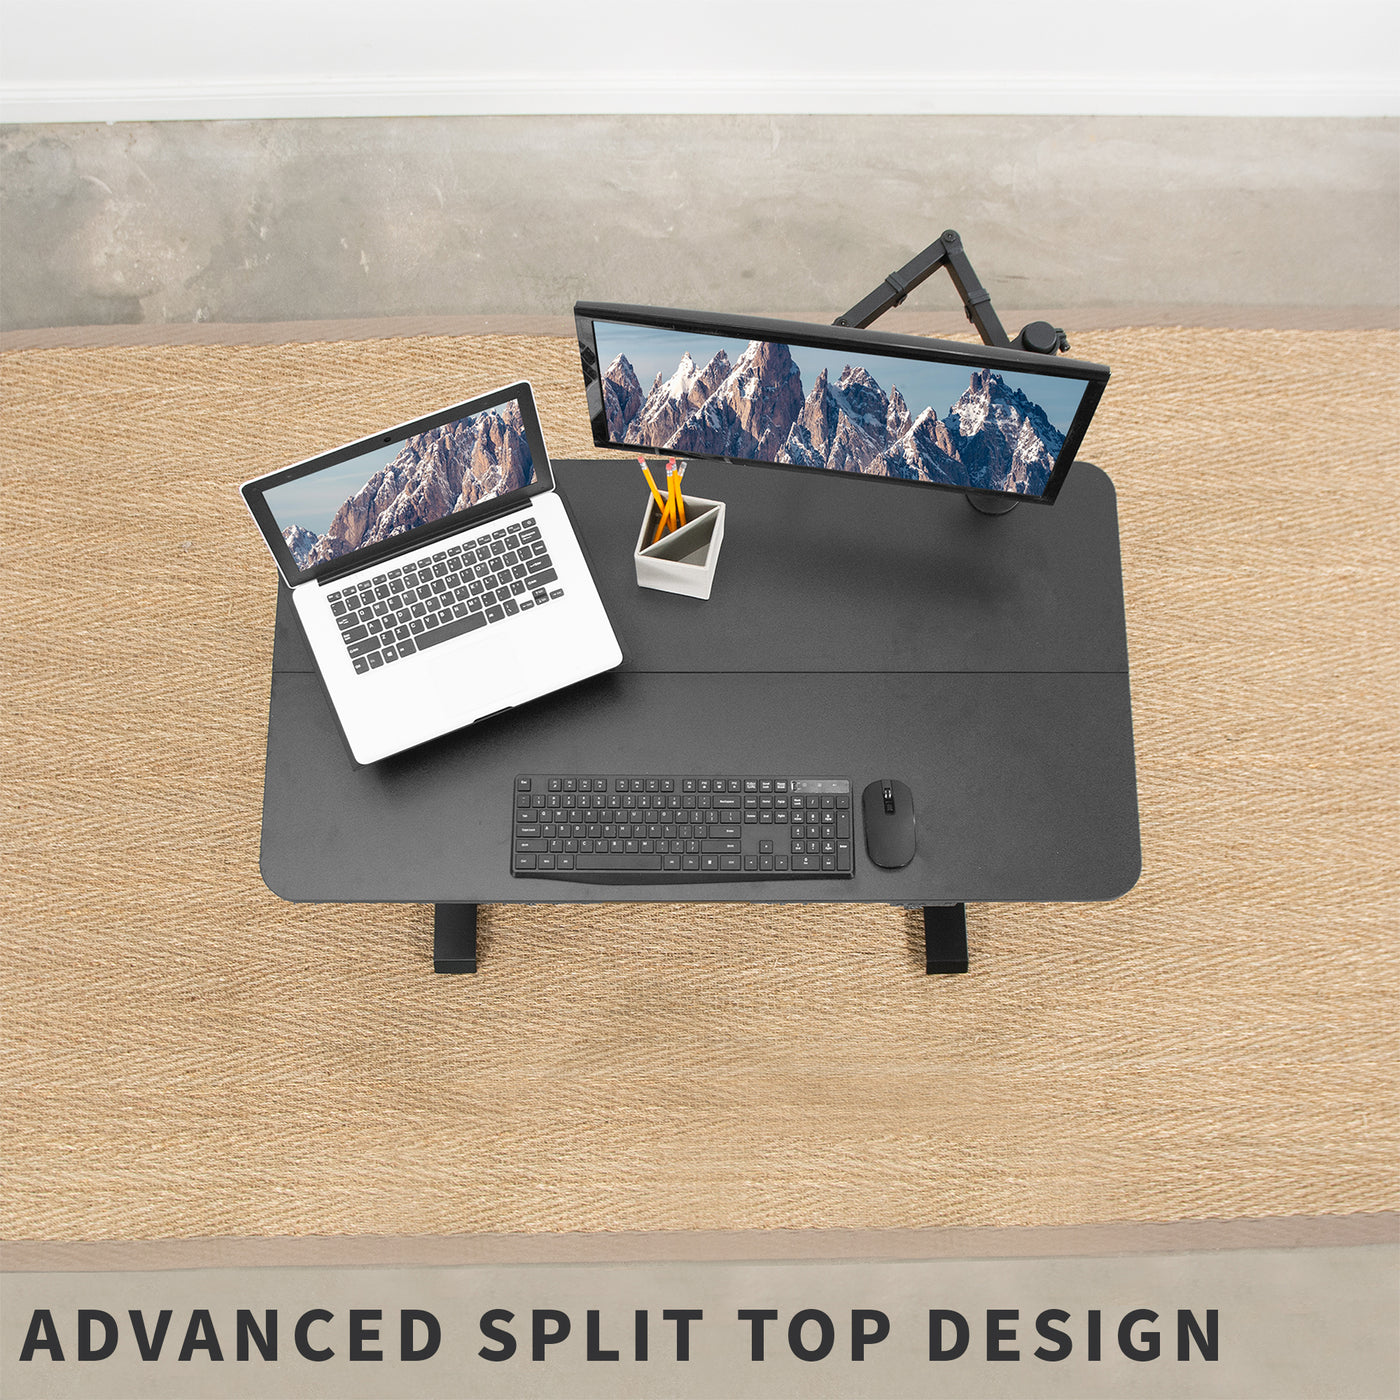 Black electric split top design desk supporting laptop, monitor, keyboard, mouse, and other office accessories.